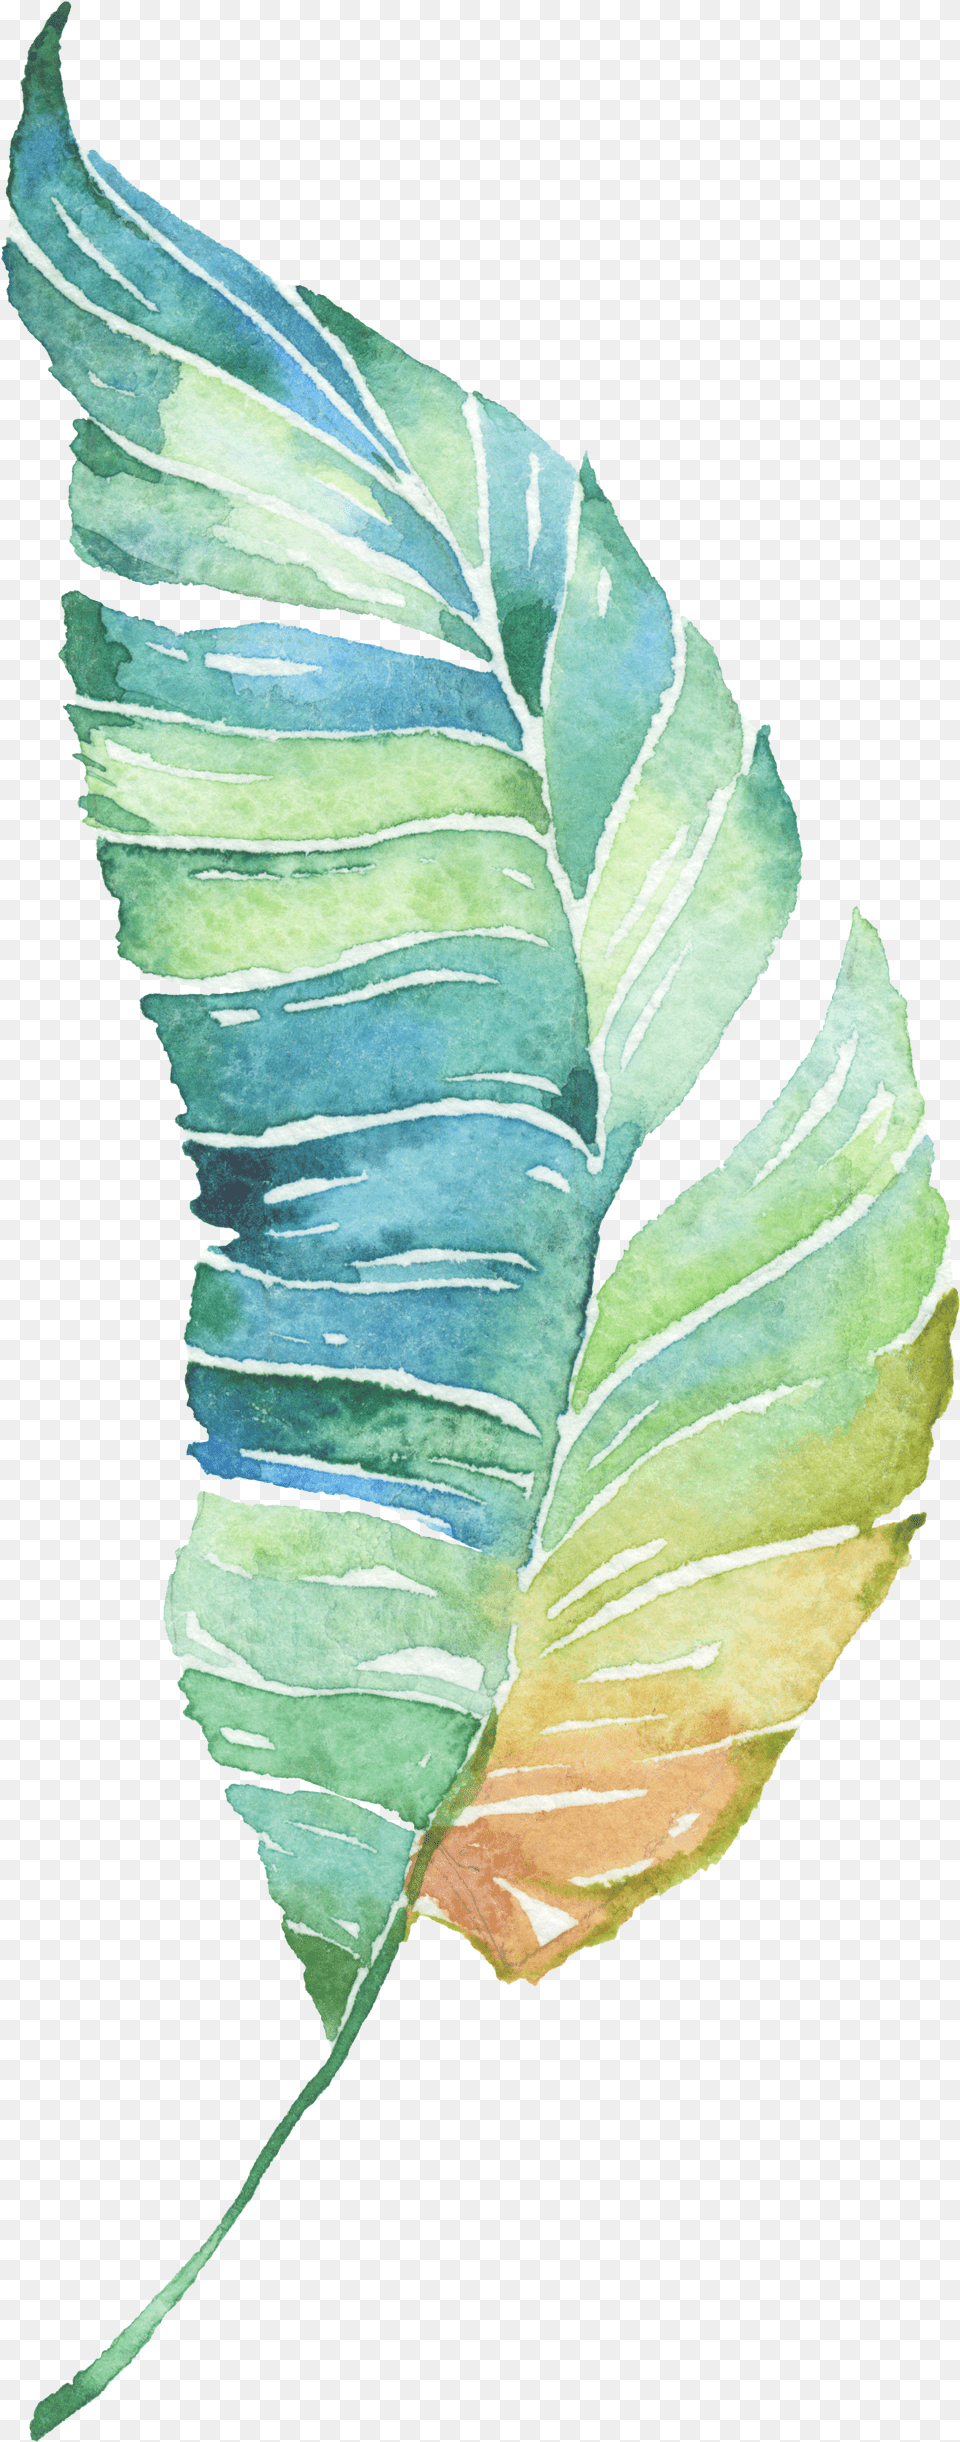 Download Water Painted Leaves Green Hd Image Free Green Water Painting Png